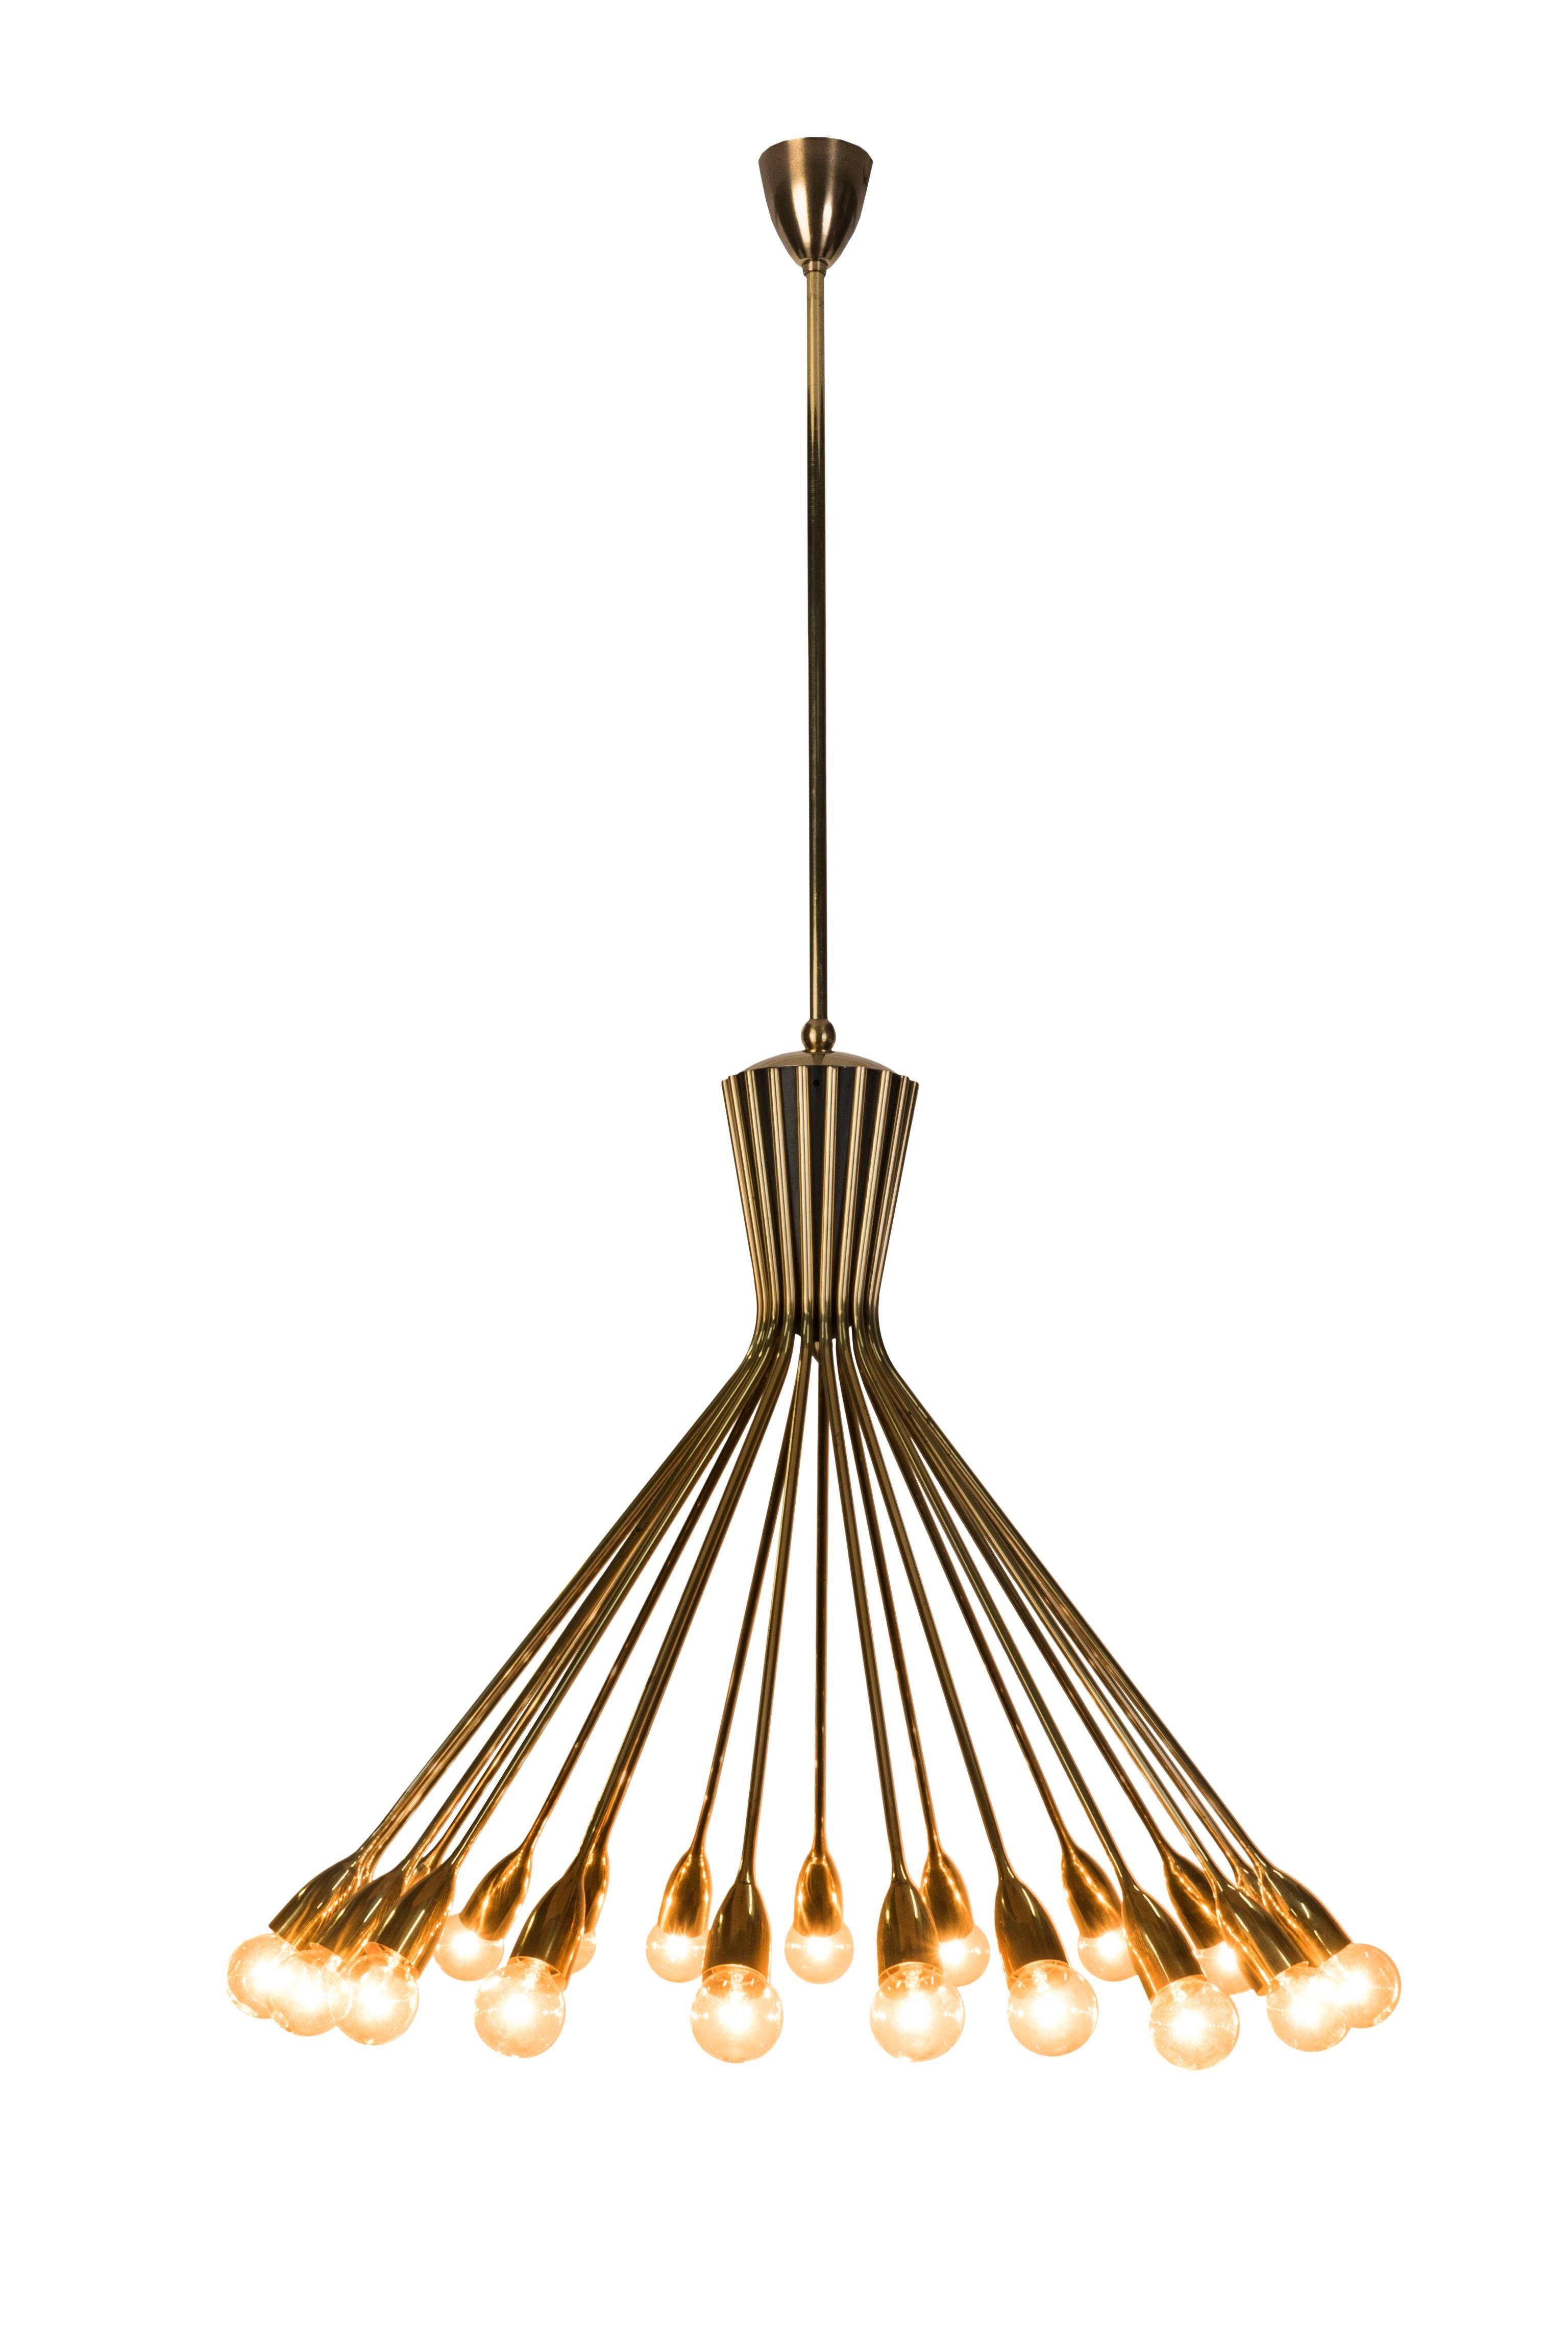 This Mid-Century Modernist spider Sputnik chandelier in the style of Stilnovo and it features a 20 arms polished brass frame. The chandelier is in excellent original condition.

Made in Germany, circa 1950.
       